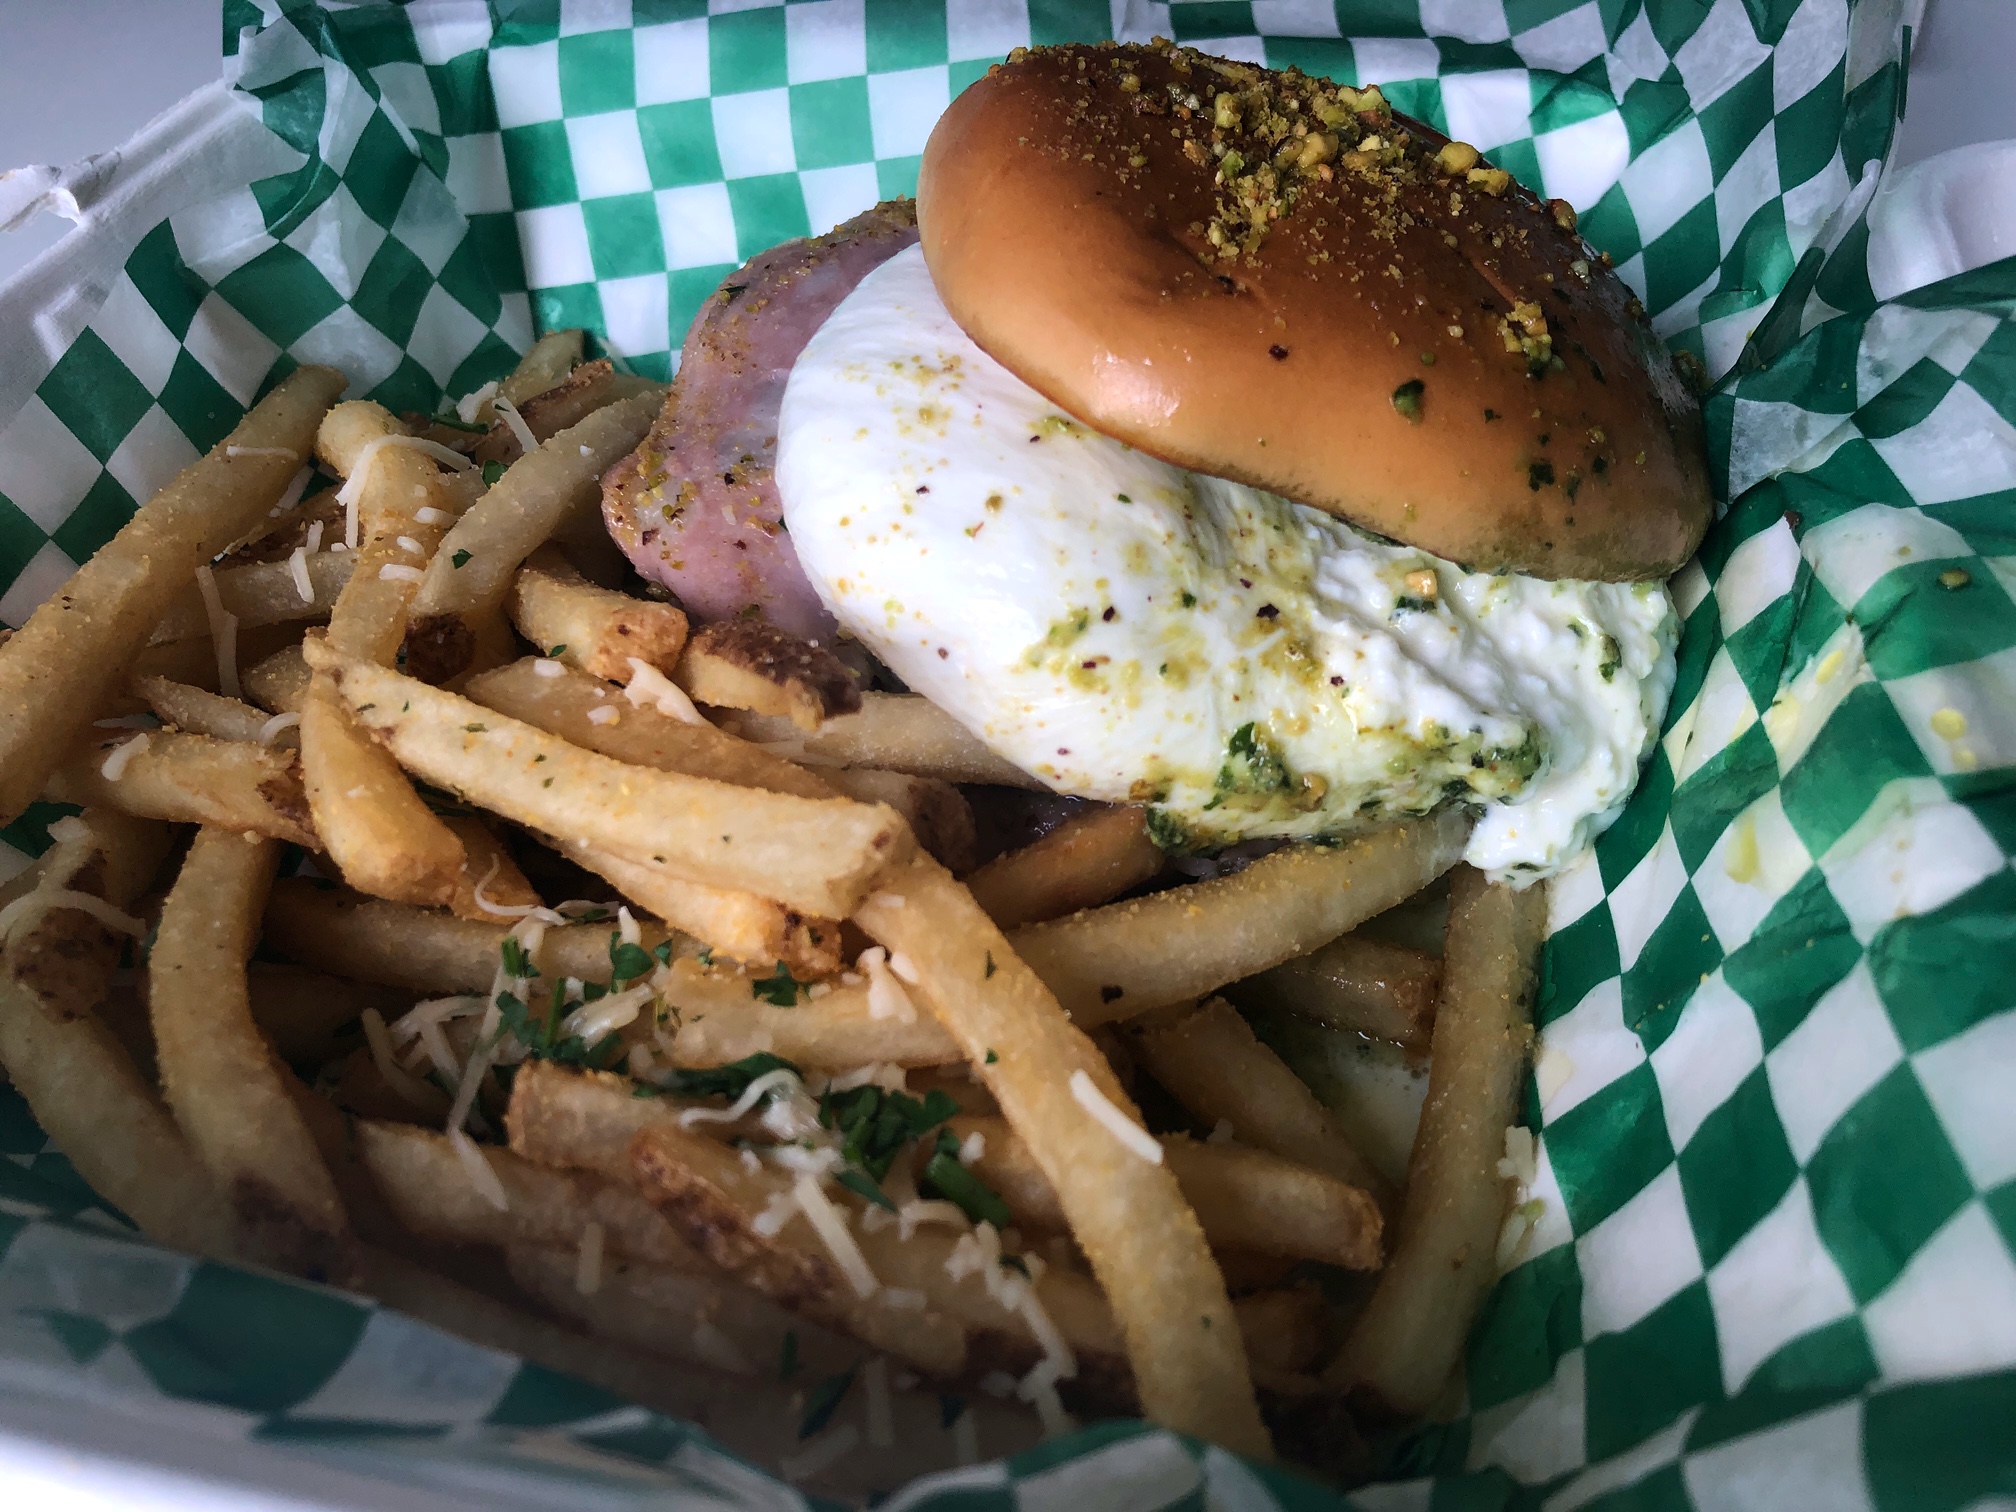 In a basket lined with white and green checkered paper, there is a burrato burger beside a large portion of long french fries. Photo by Alyssa Buckley.